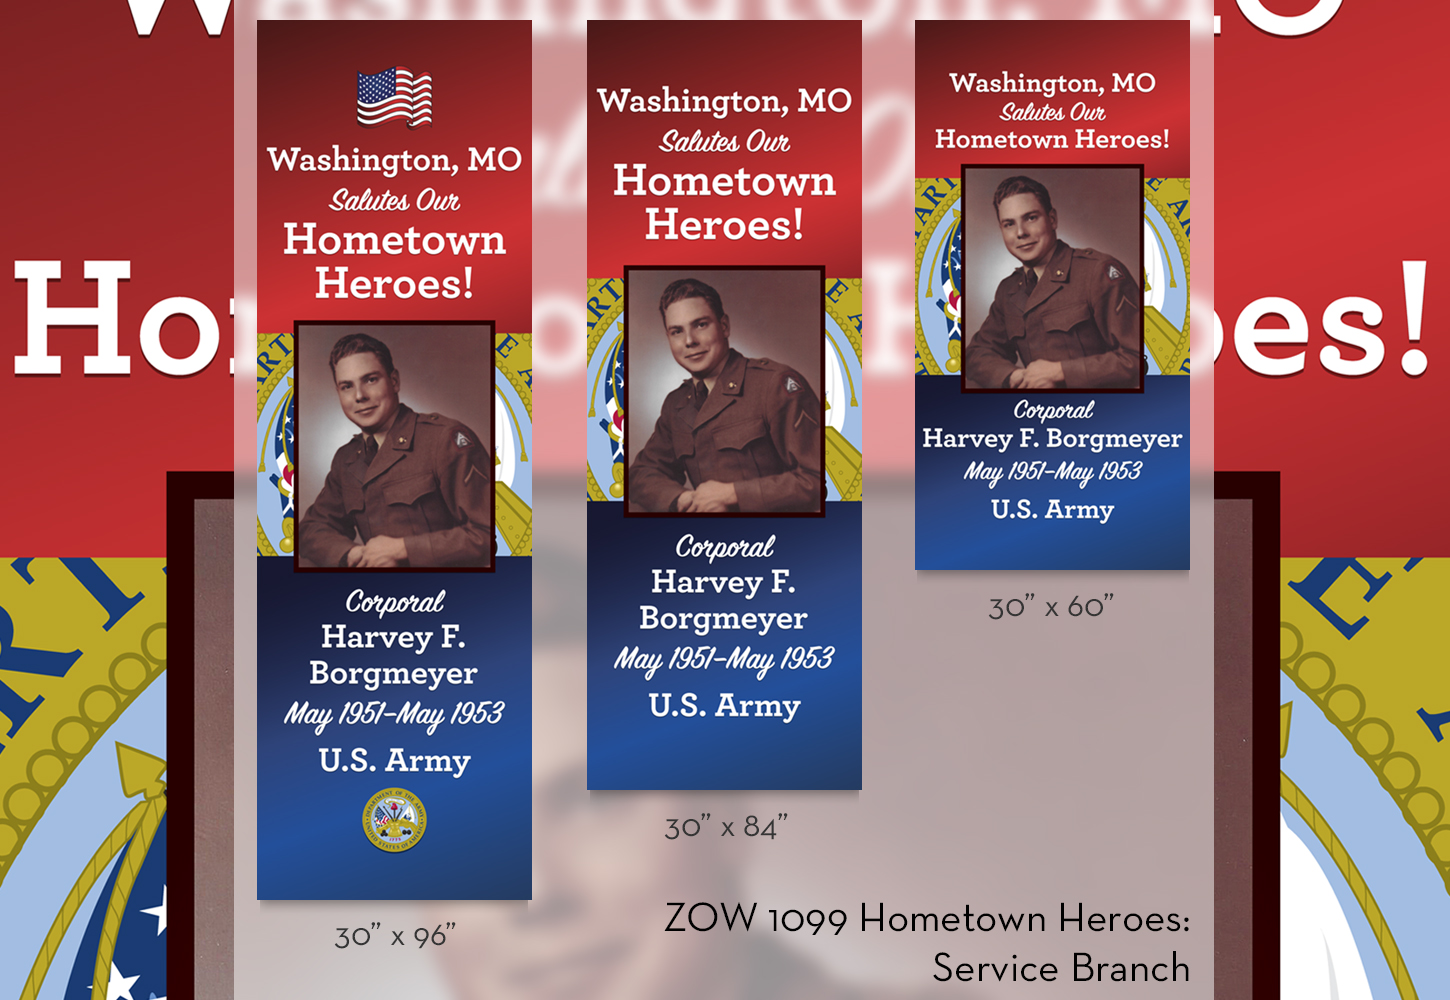 ZOW 1099 Hometown Heroes: Service Branch